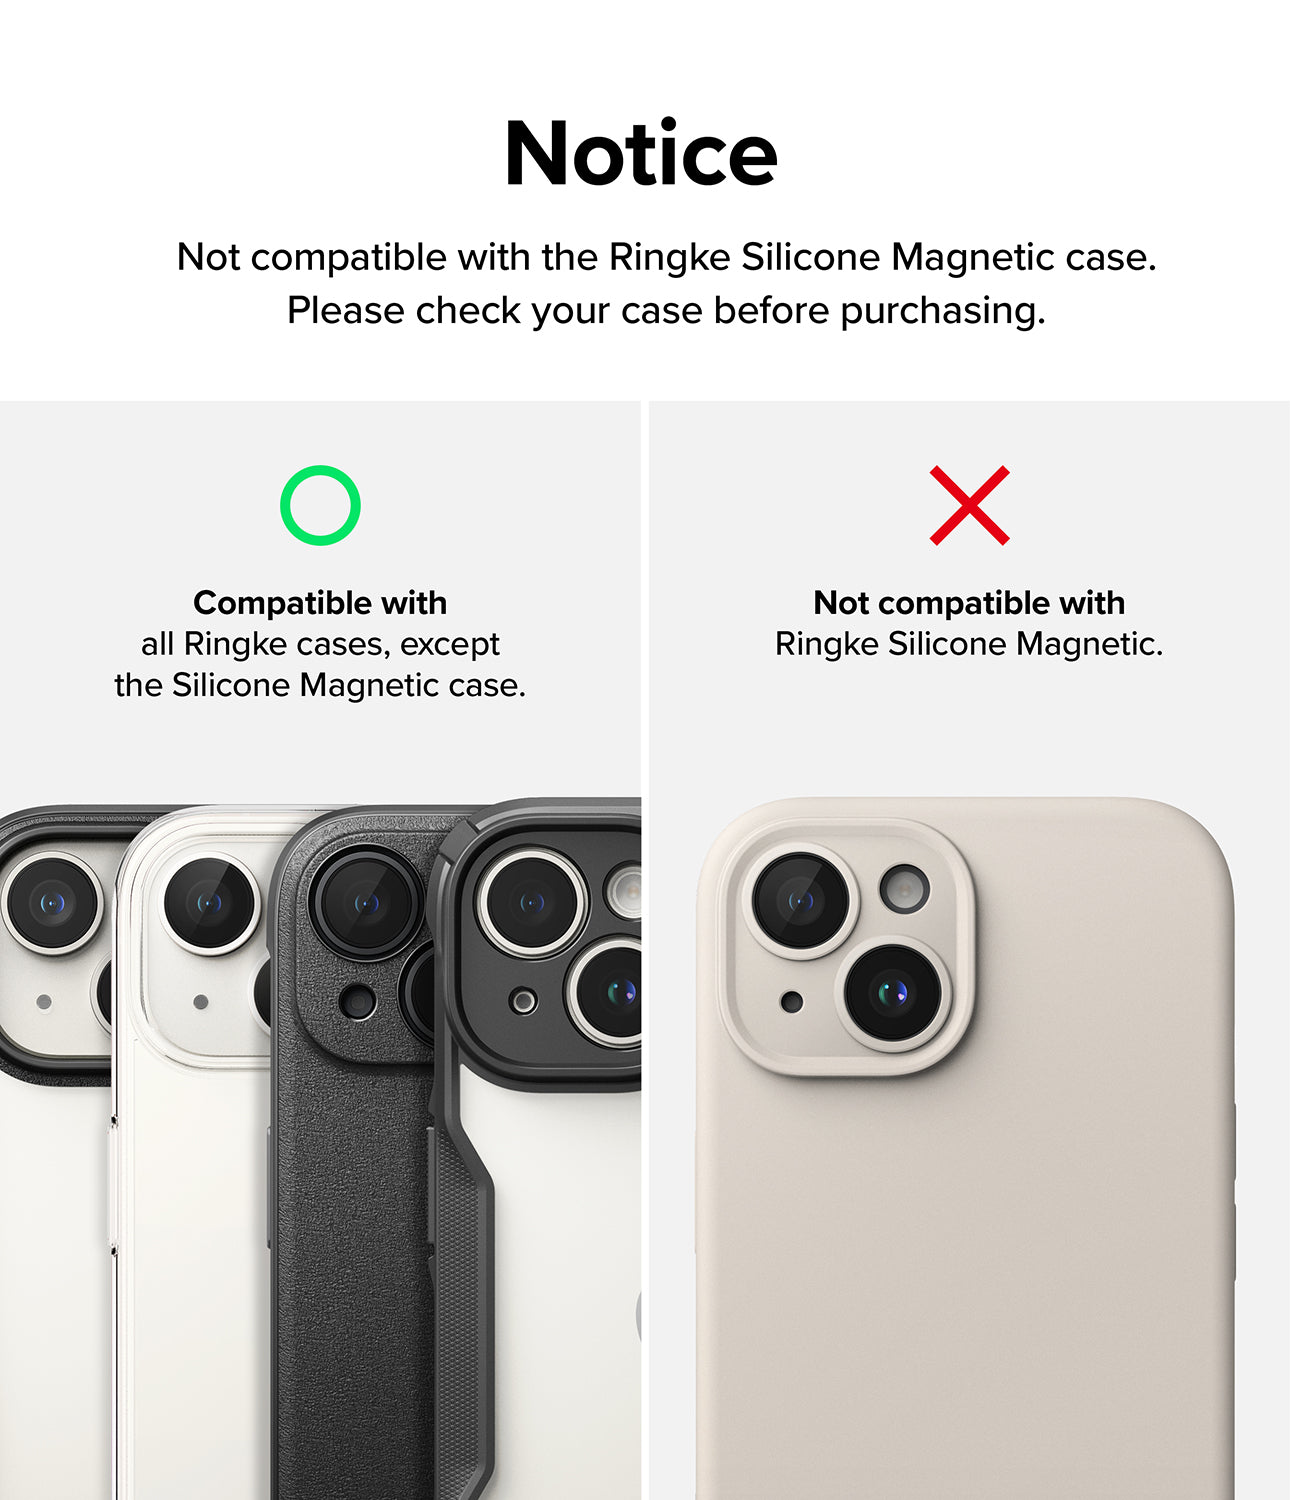 Compatible with all Ringke cases, except Ringke Silicone Magnetic Case - Notice. Not compatible with the Ringke Silicone Magnetic case. Please check your case before purchasing. 